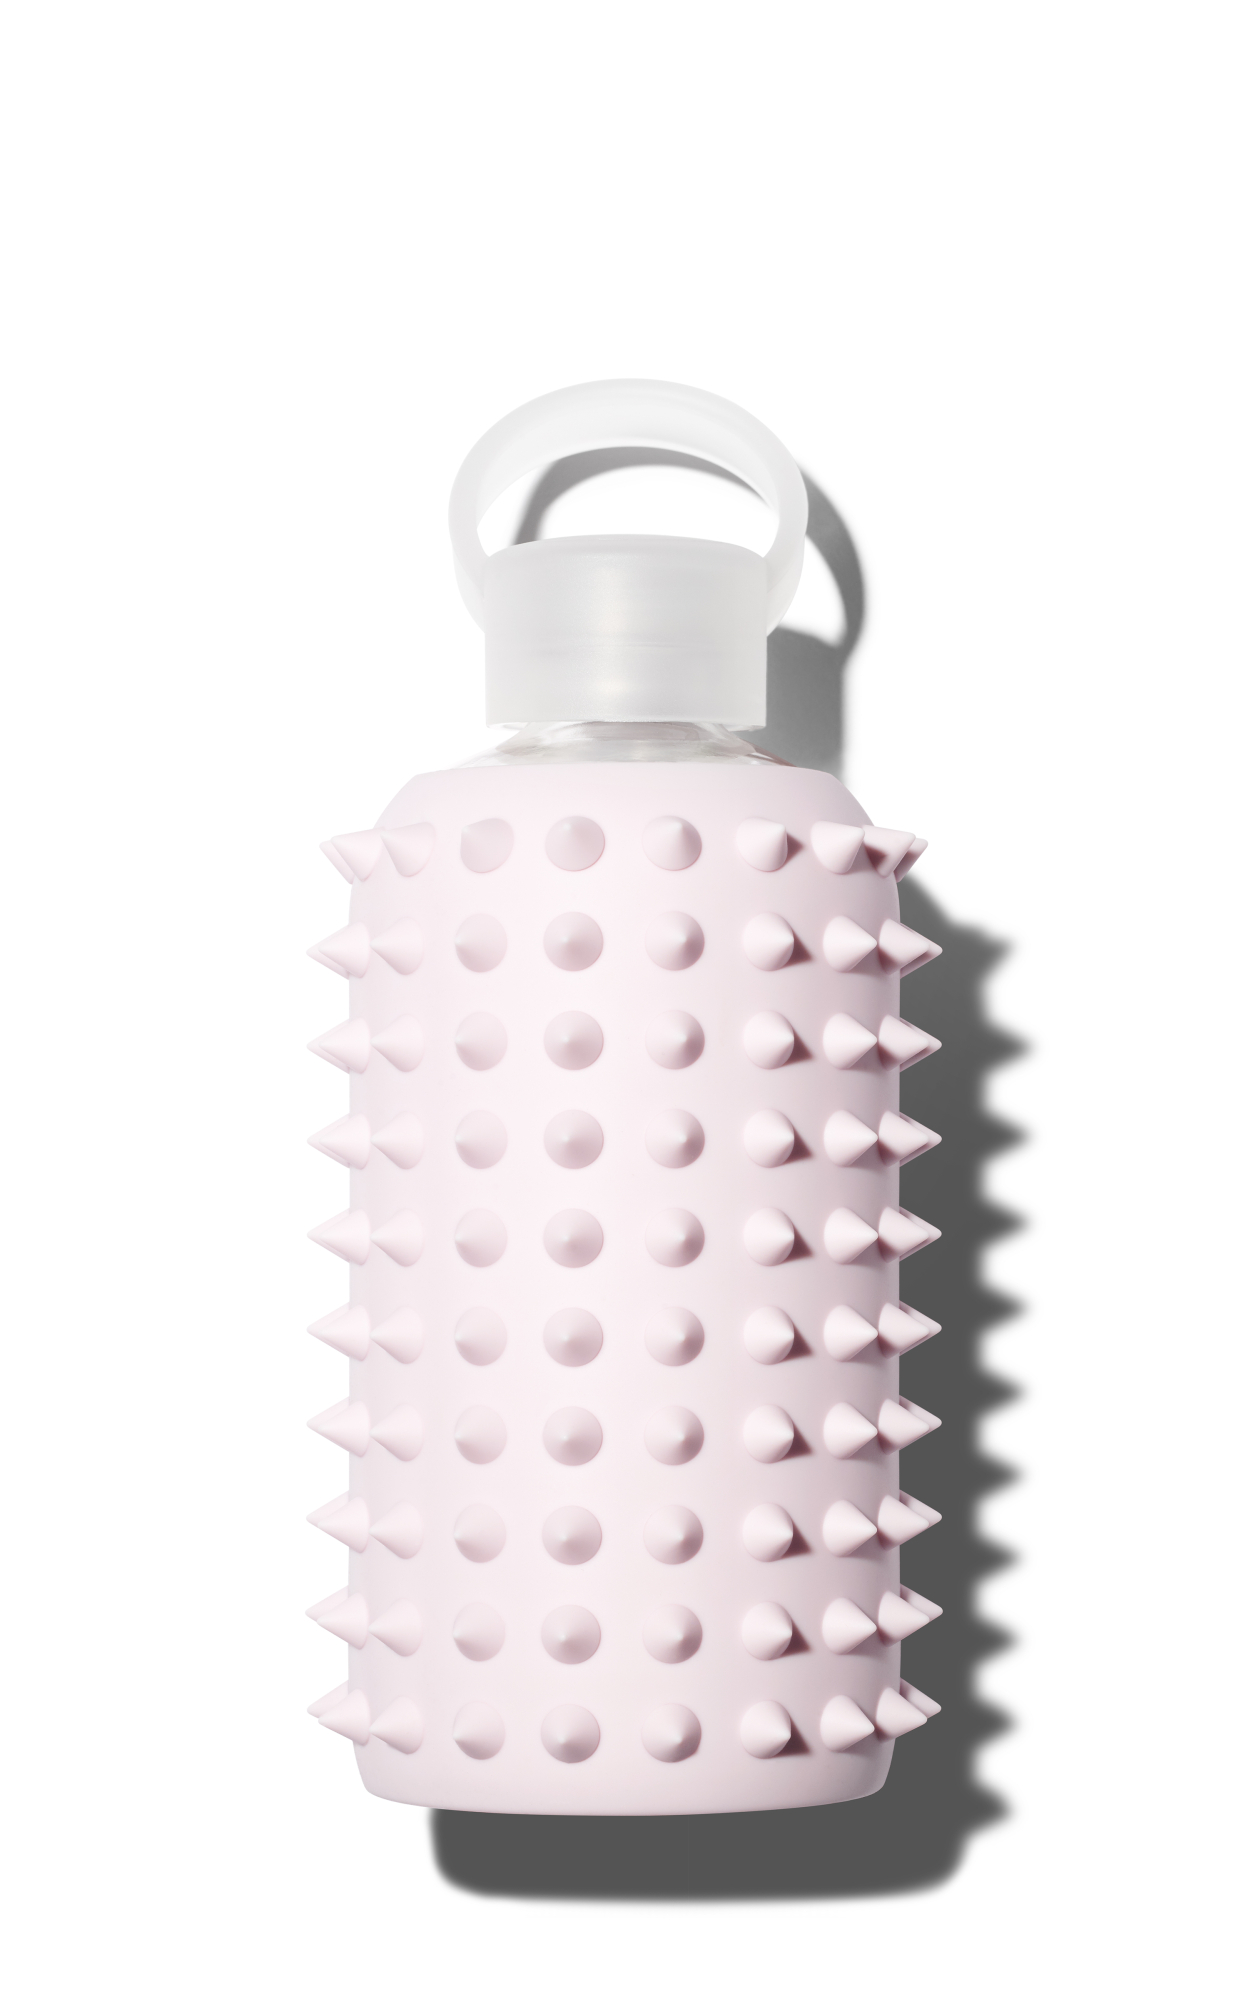 Fancy Water Bottles Aren't Worth the Money, But They May Change